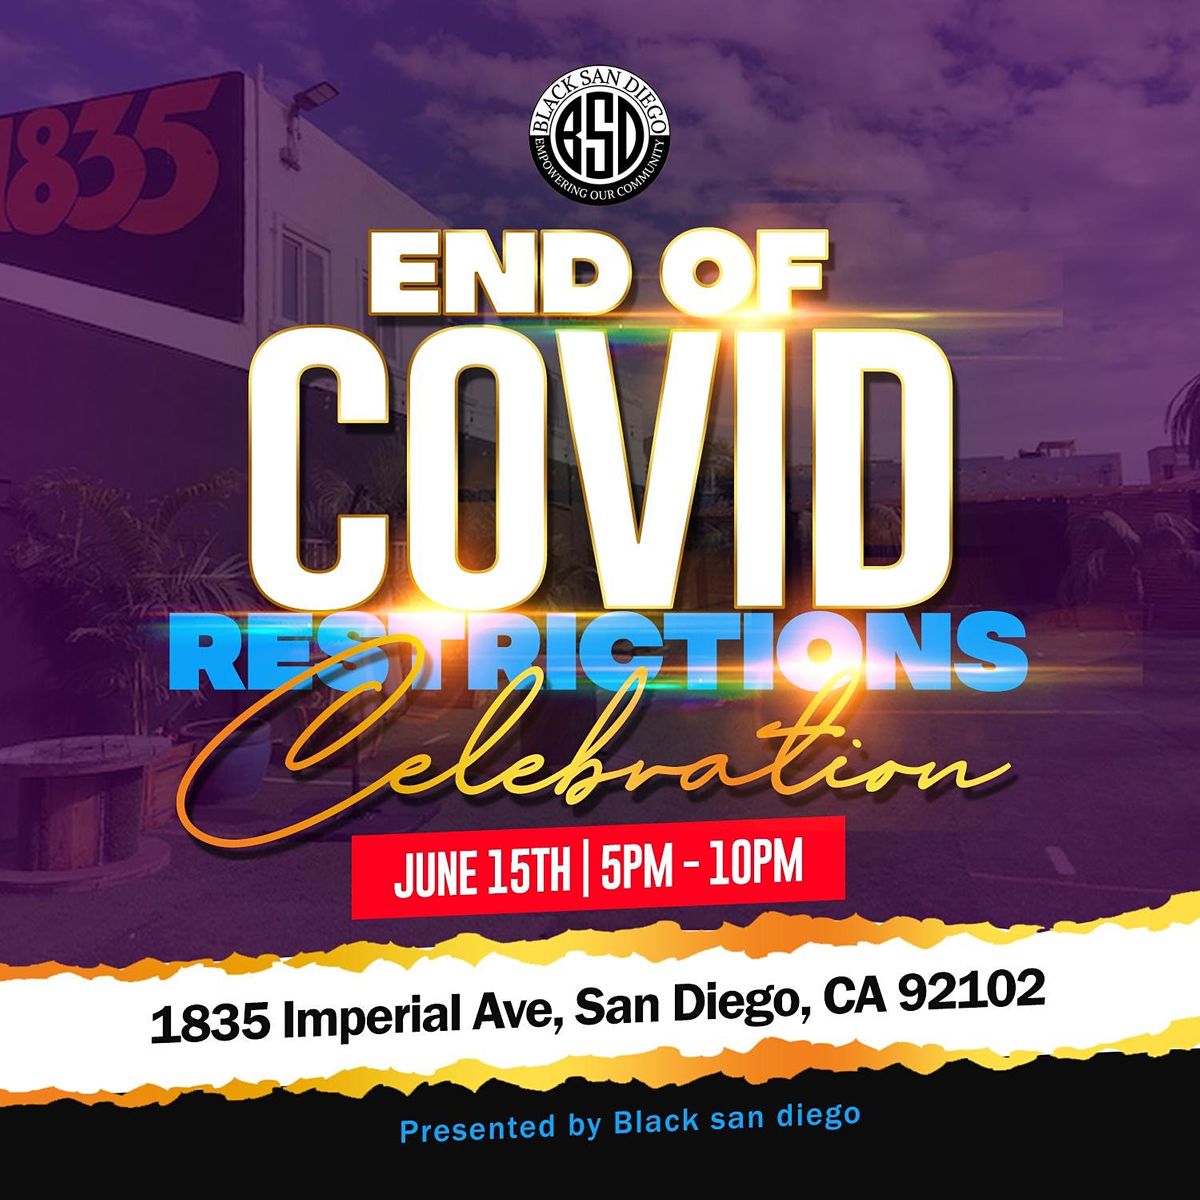 BLACK SAN DIEGO'S END OF COVID RESTRICTIONS CELEBRATION